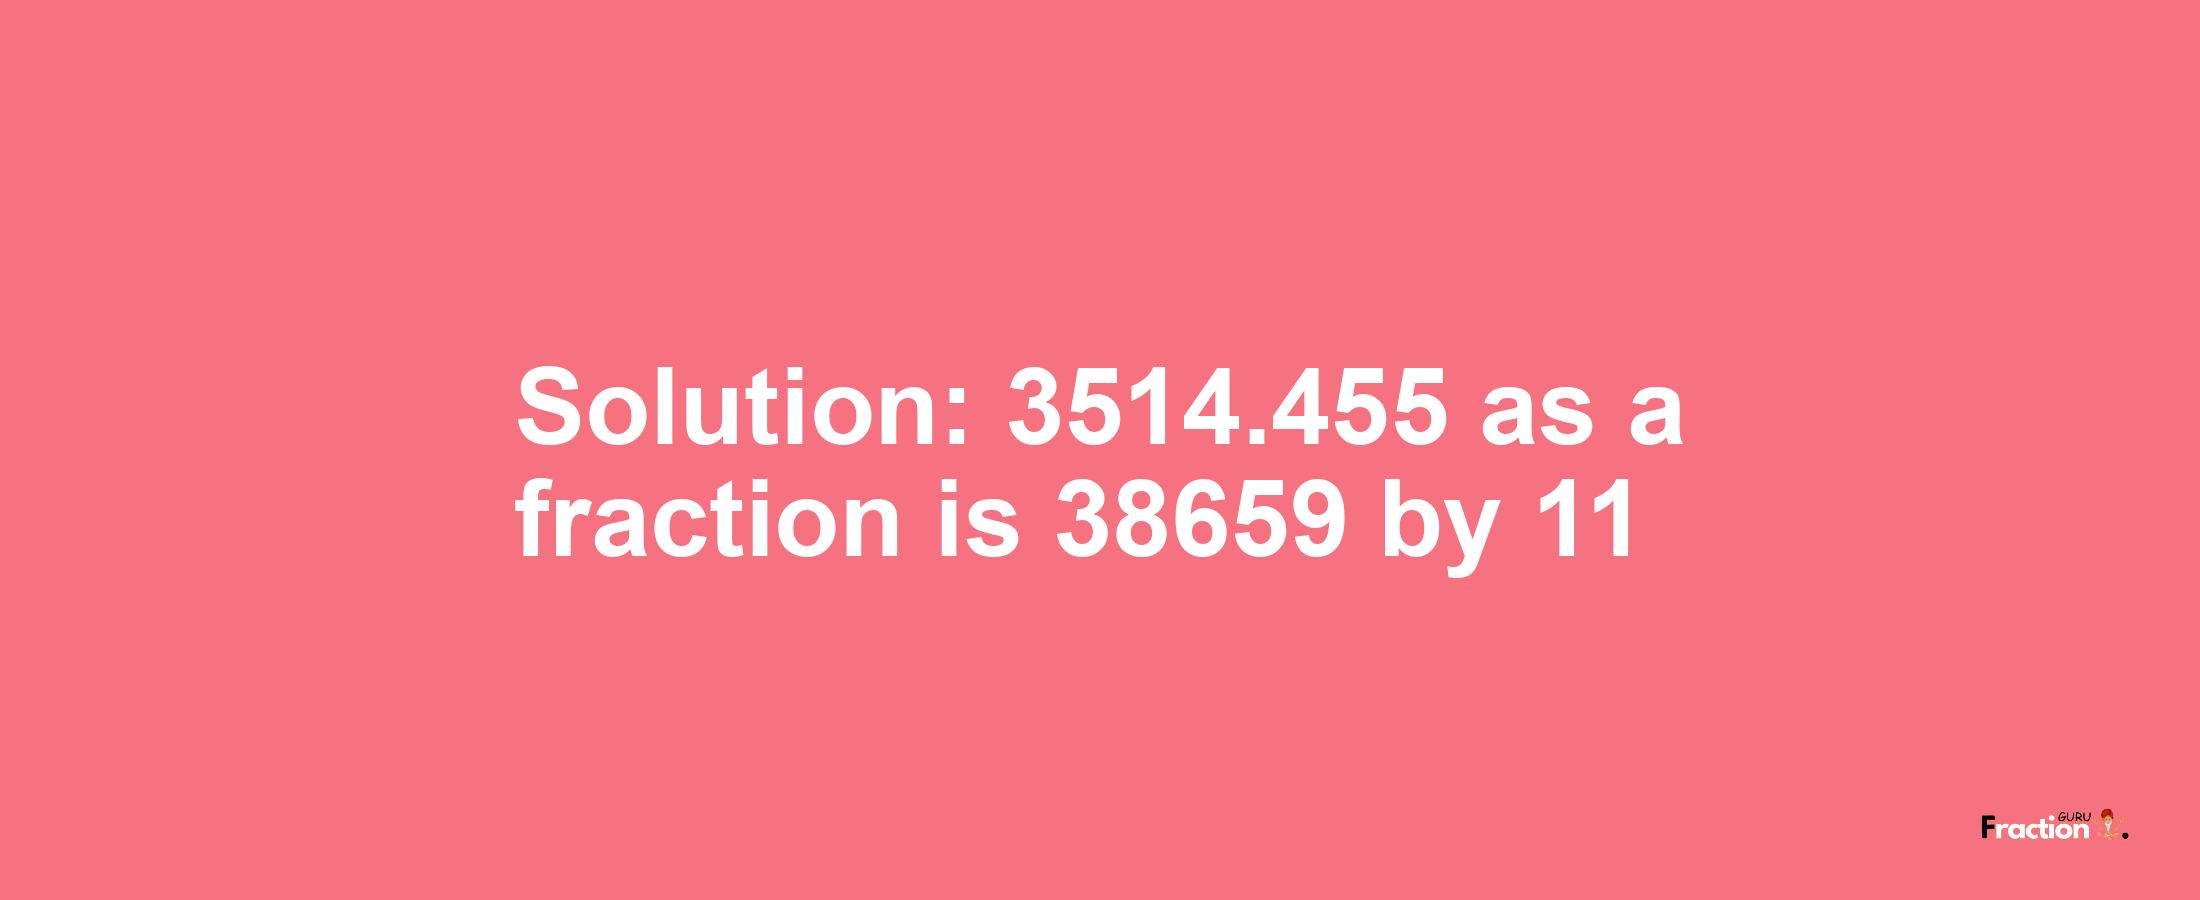 Solution:3514.455 as a fraction is 38659/11